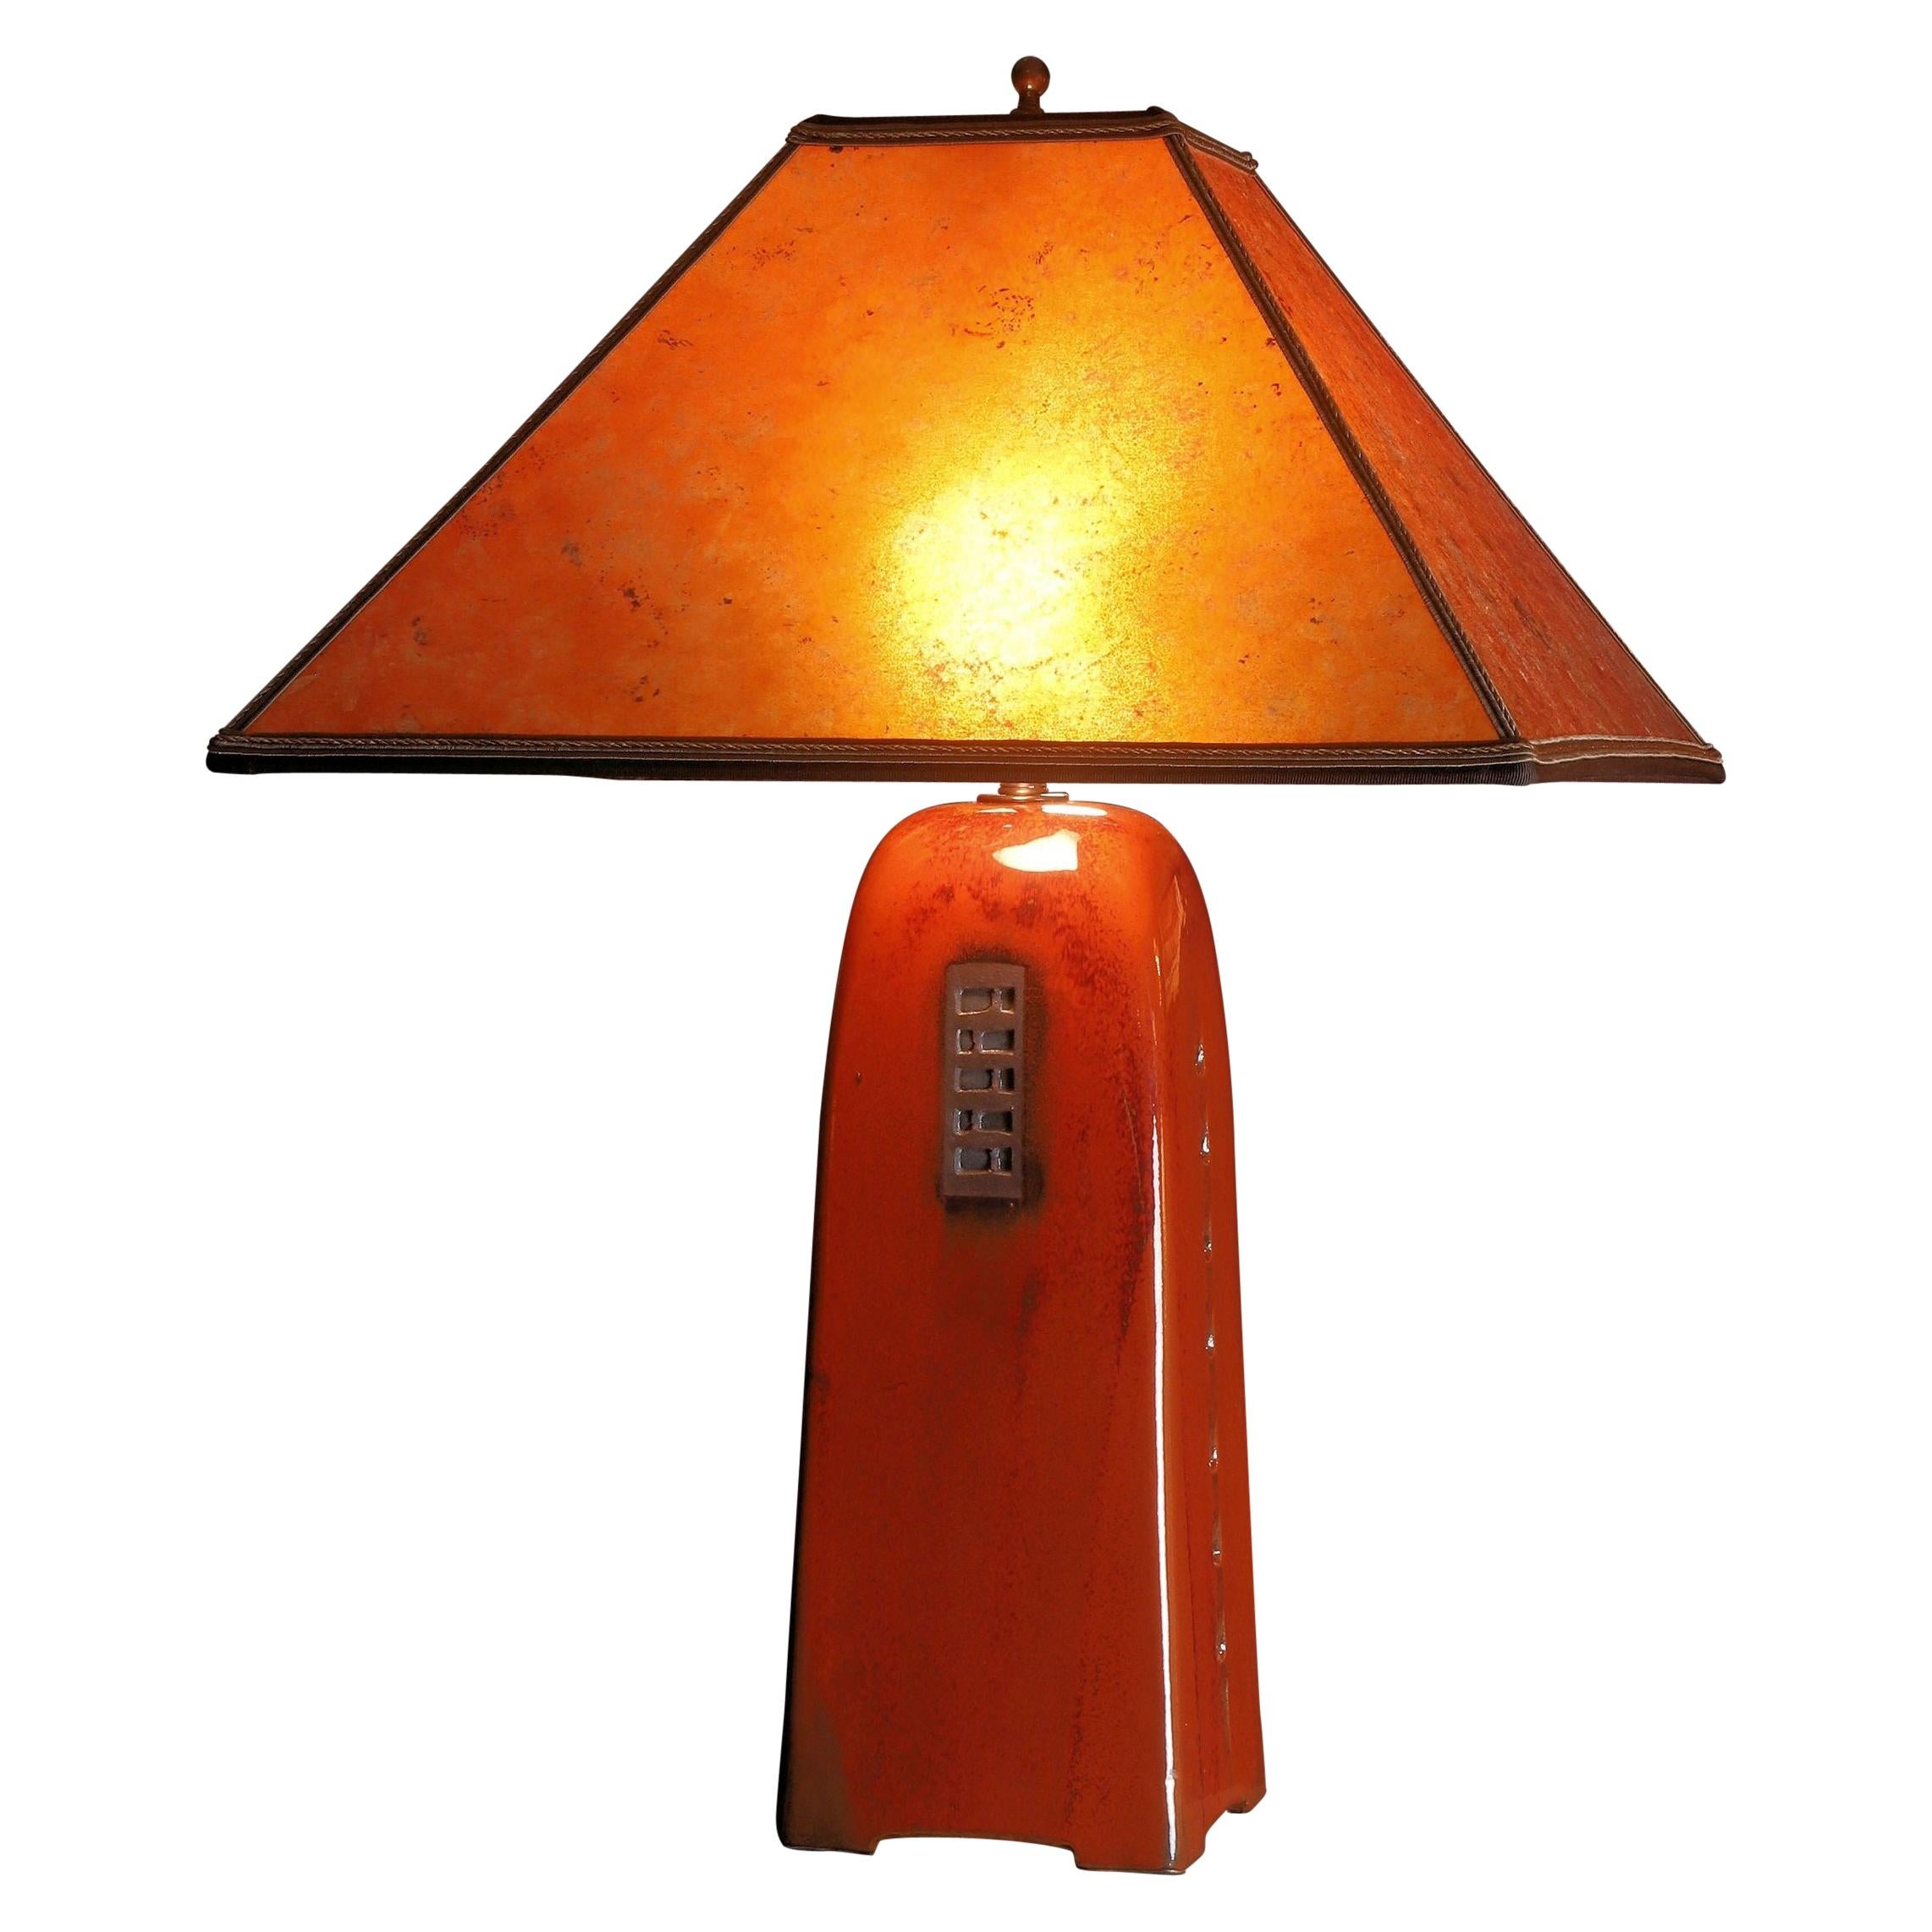 One of a Kind Artisan Made Russet Ceramic Table Lamp with Mica Shade